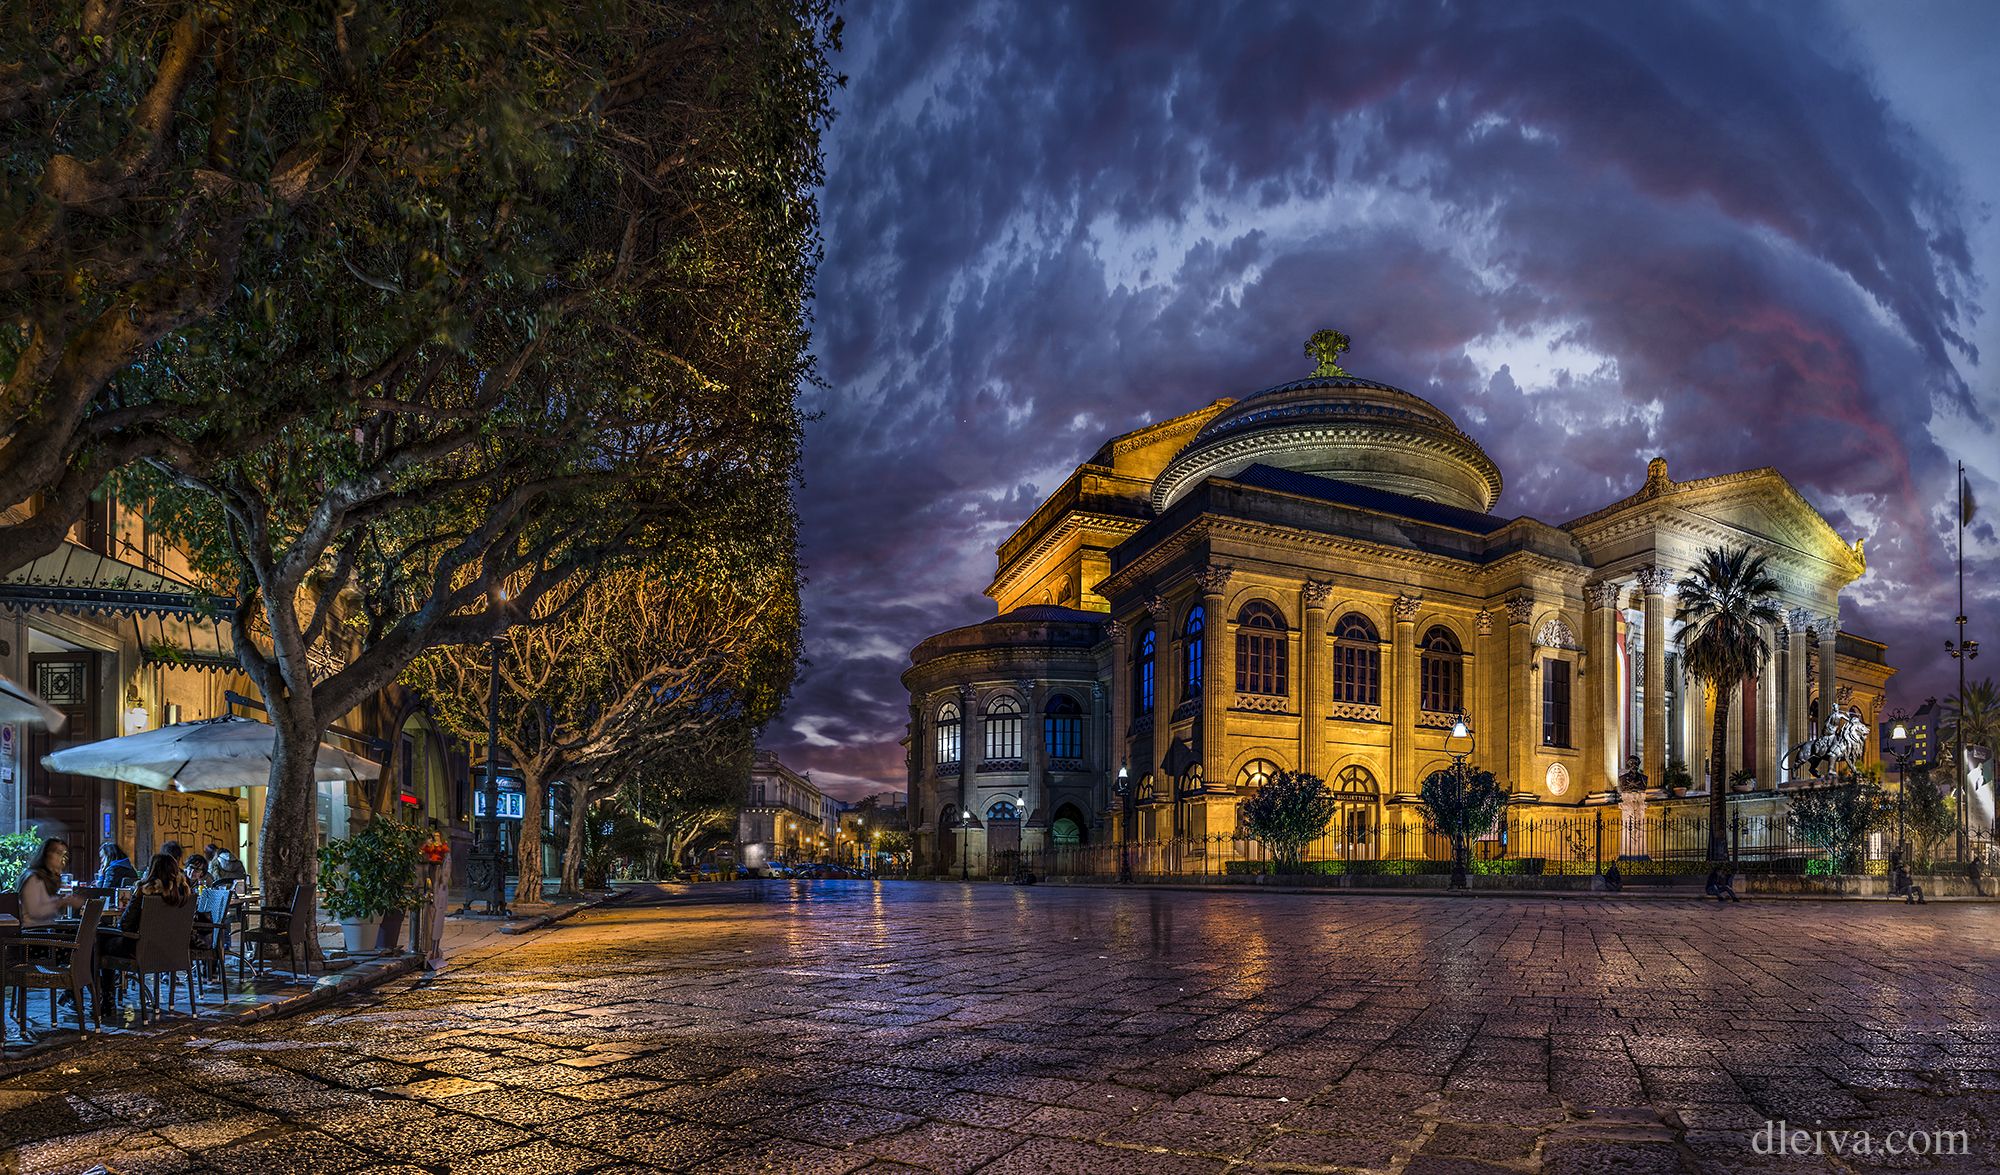 General 2000x1175 Sicily Palermo night theaters architecture Italy lights trees watermarked